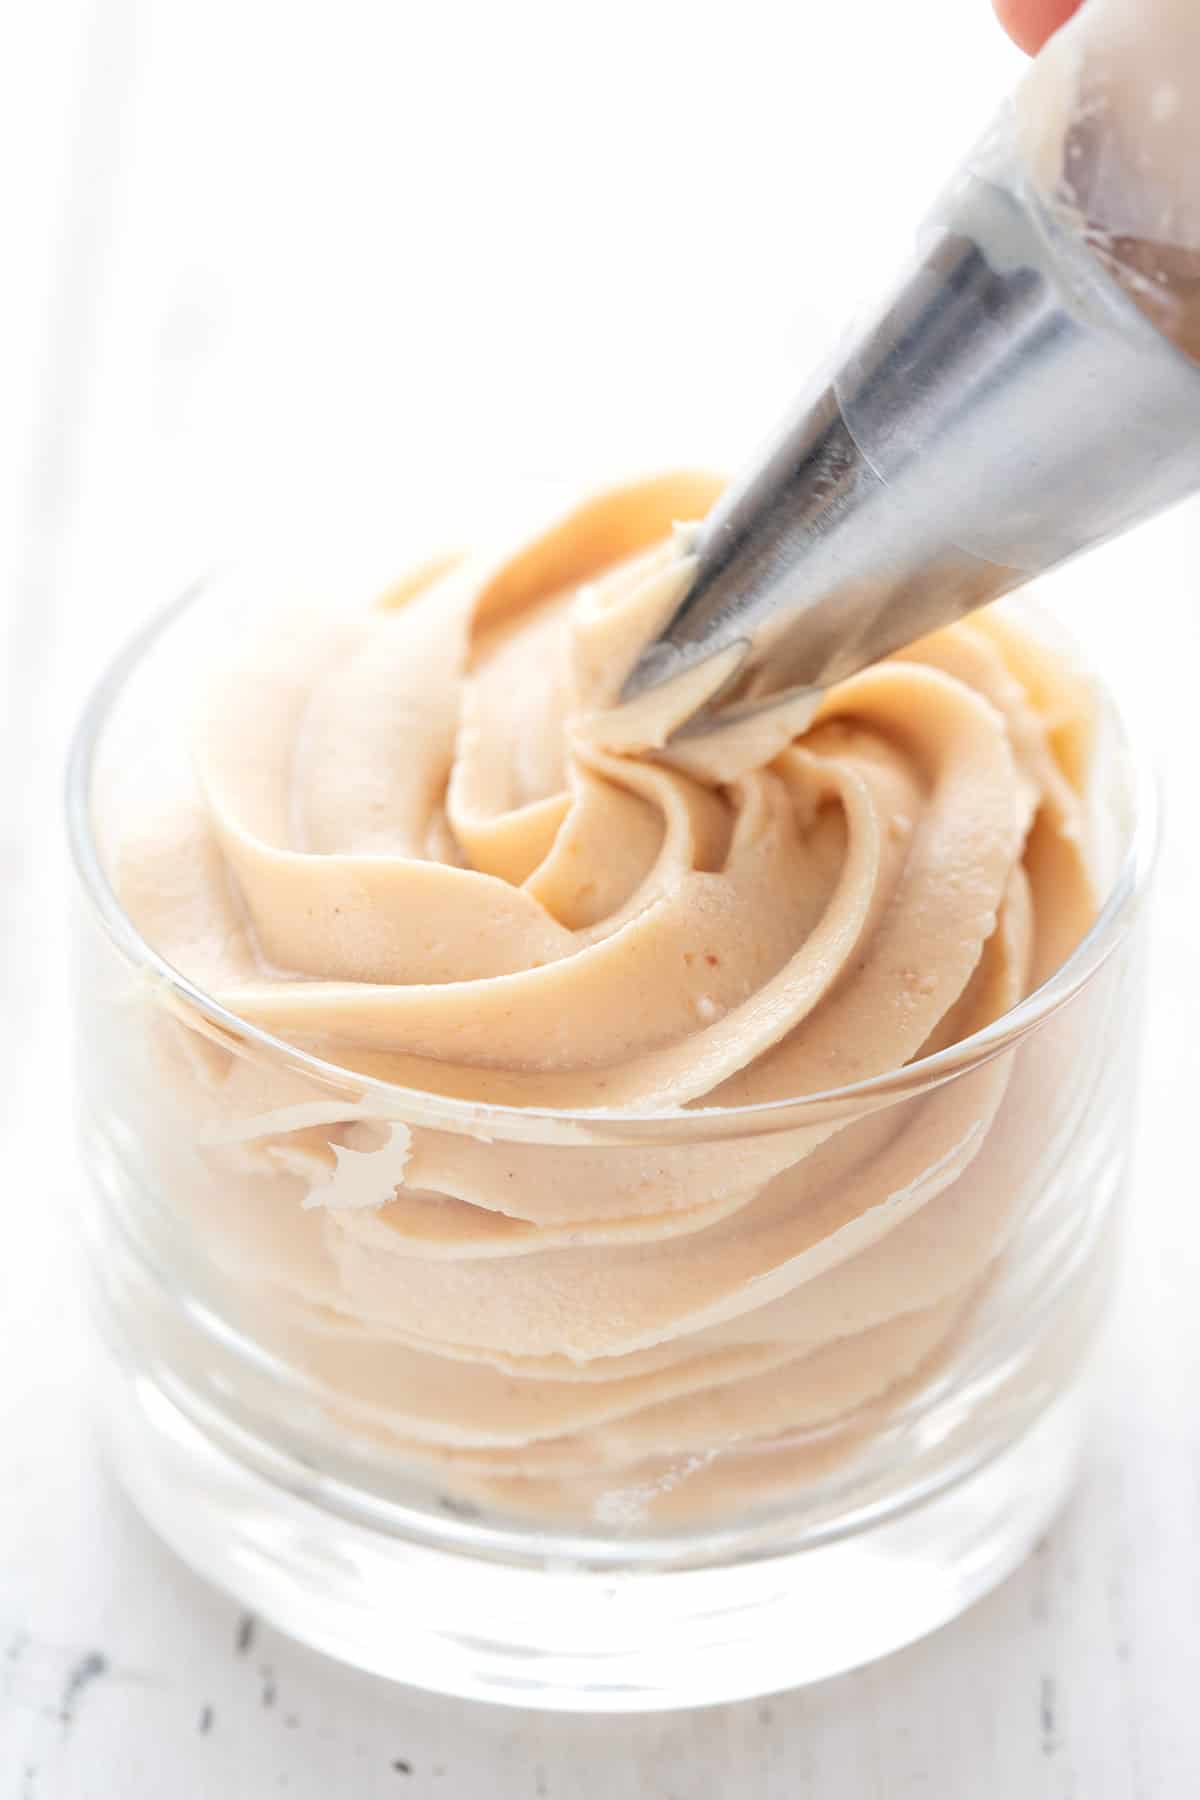 Keto Peanut Butter Mousse - All Day I Dream About Food